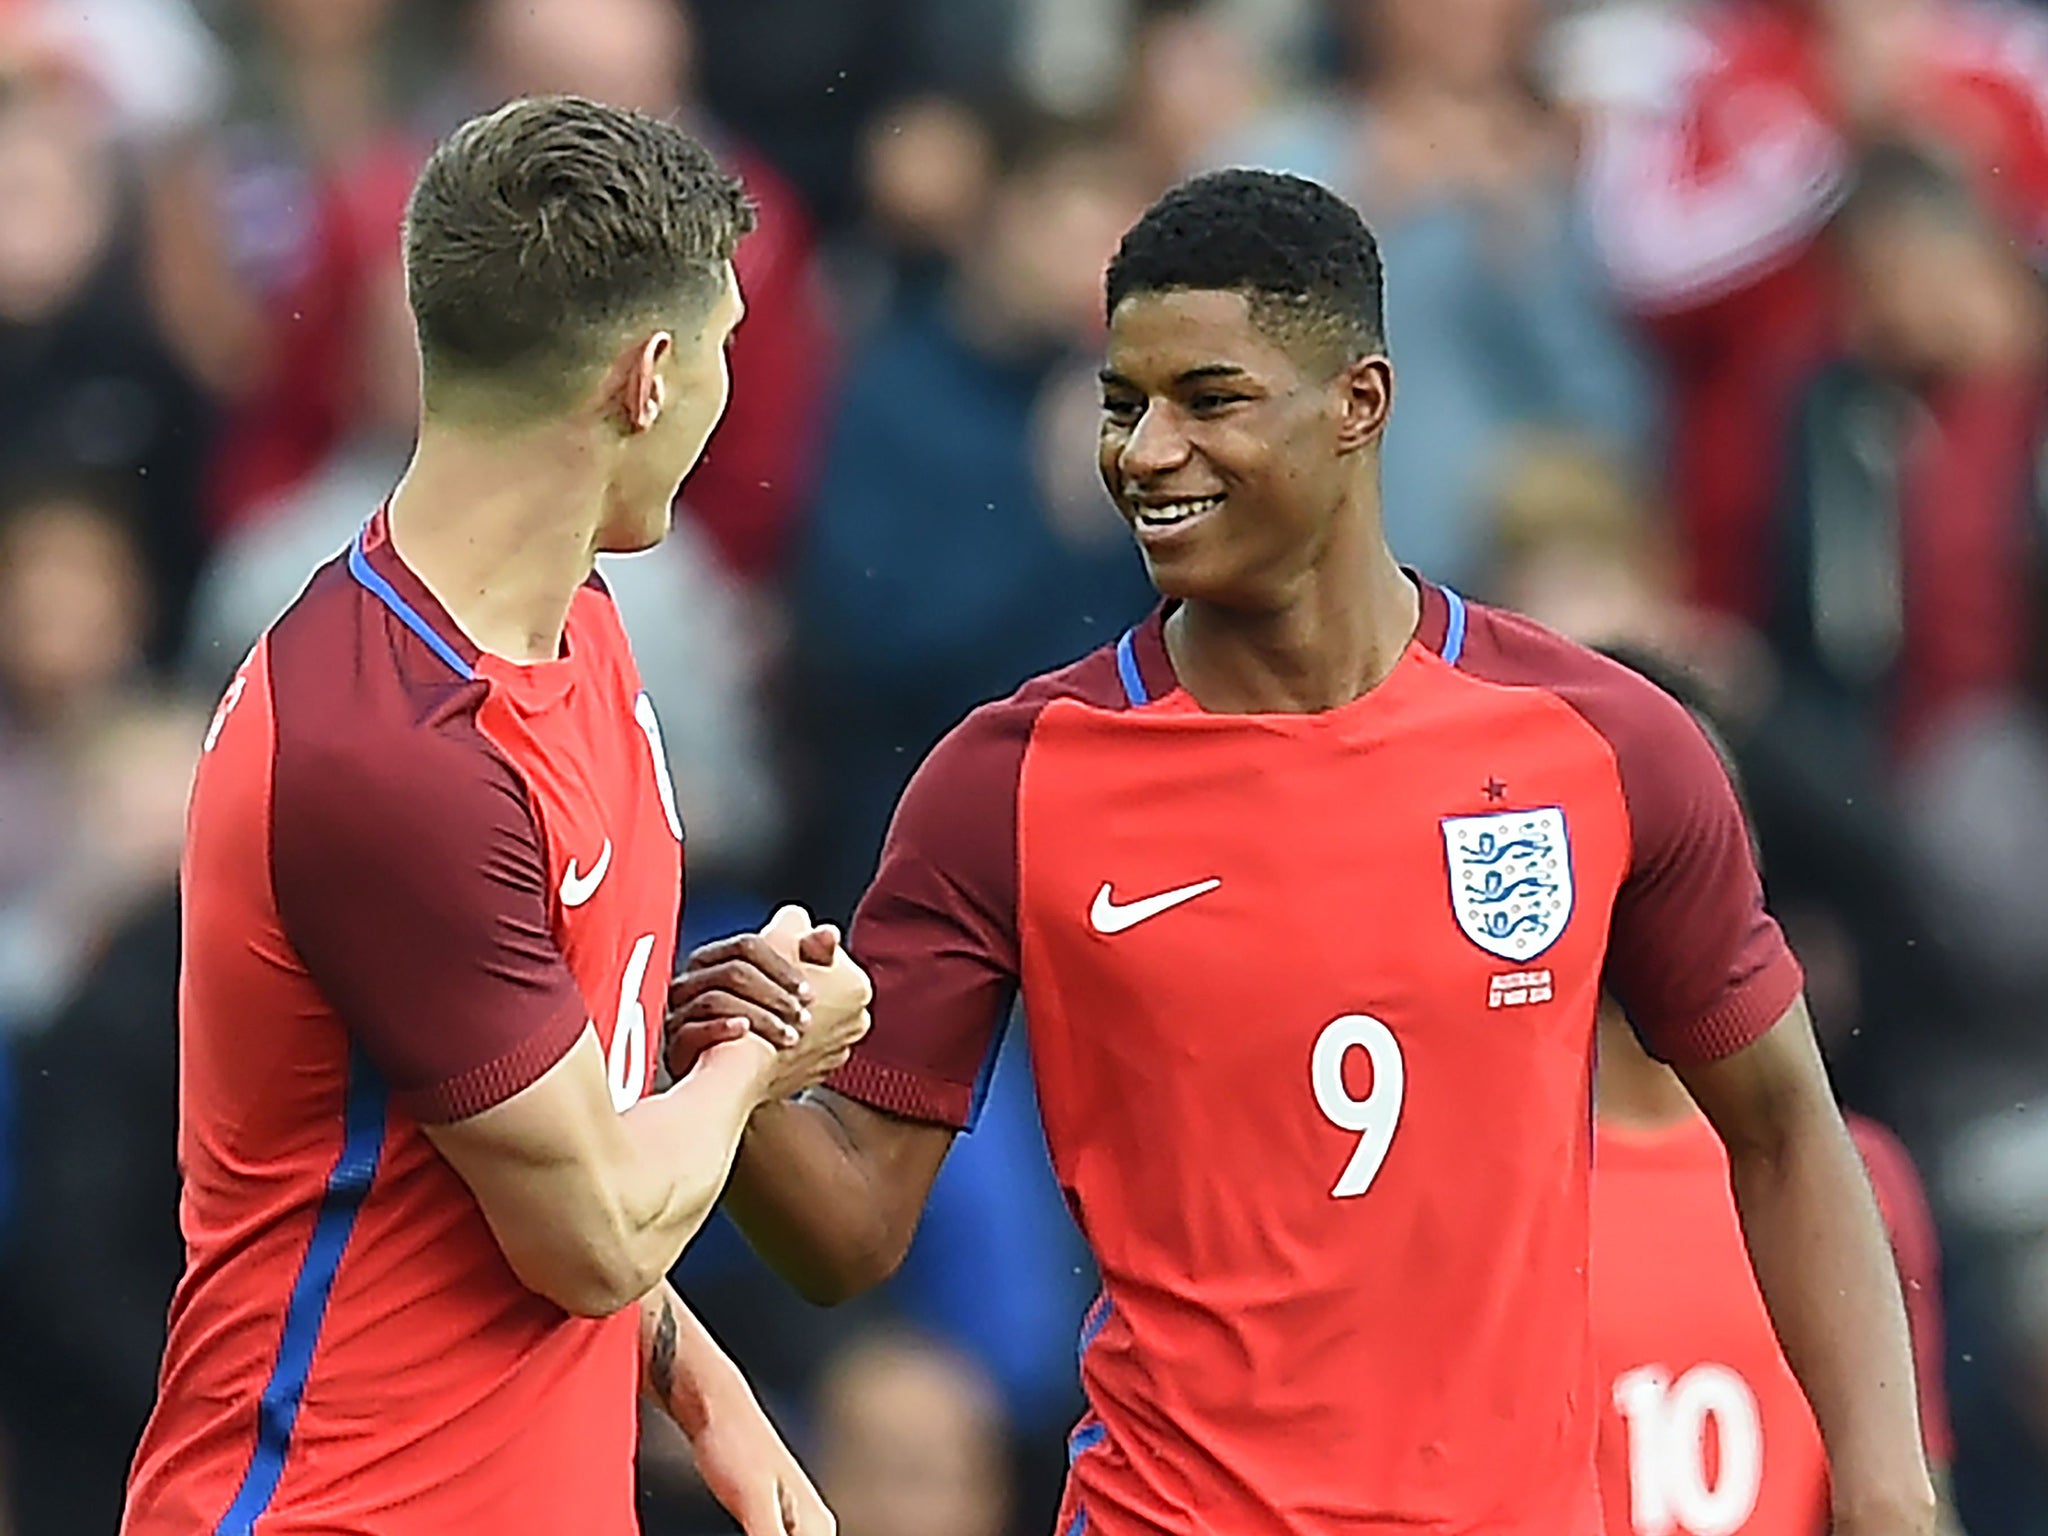 Rashford's debut goal came from his first shot in international football